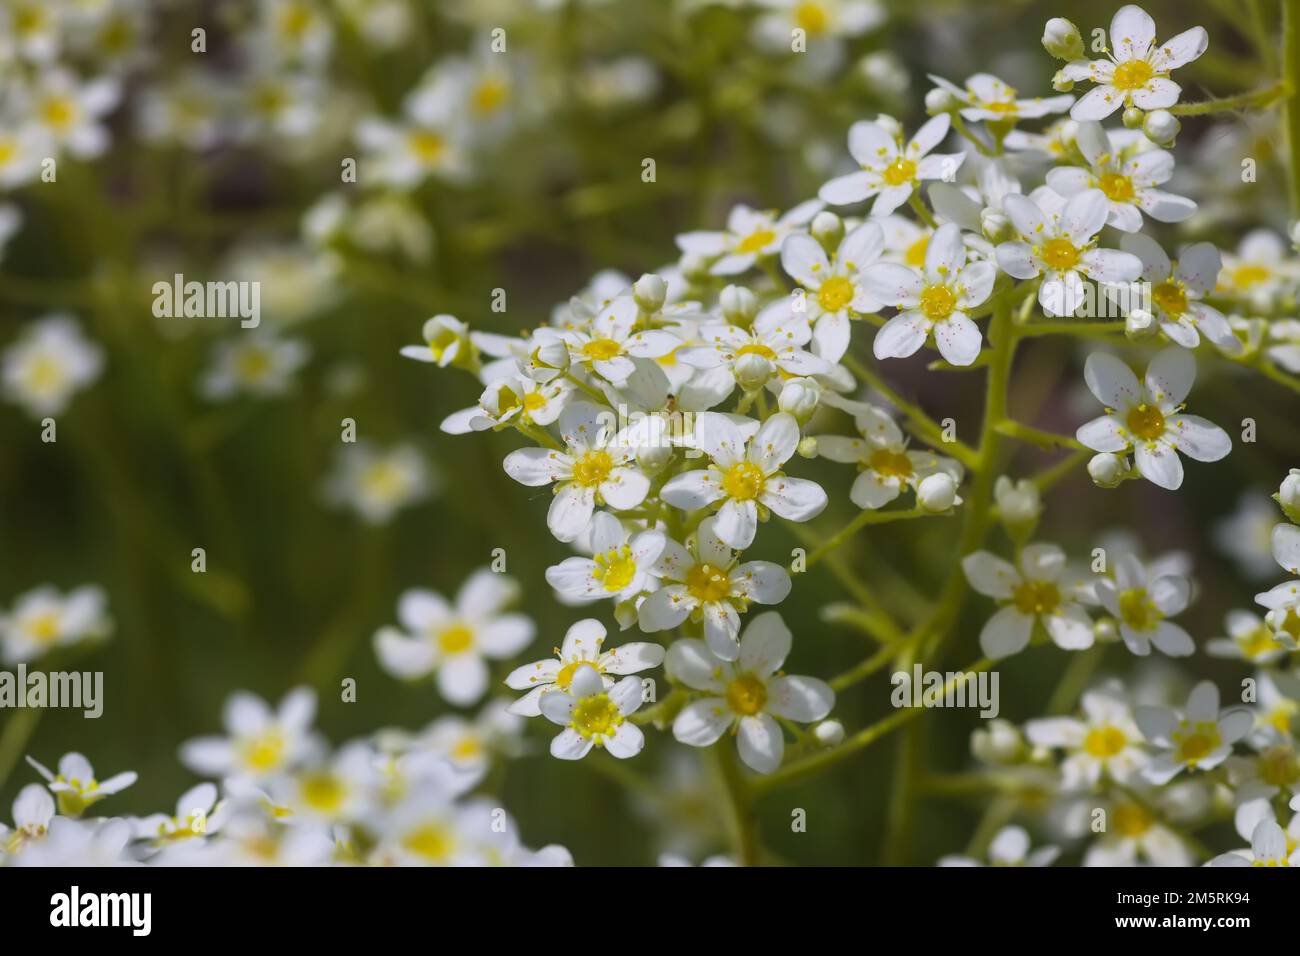 Meadow saxifrage flowers. Saxifraga granulata plants flowering in summer park. Stock Photo